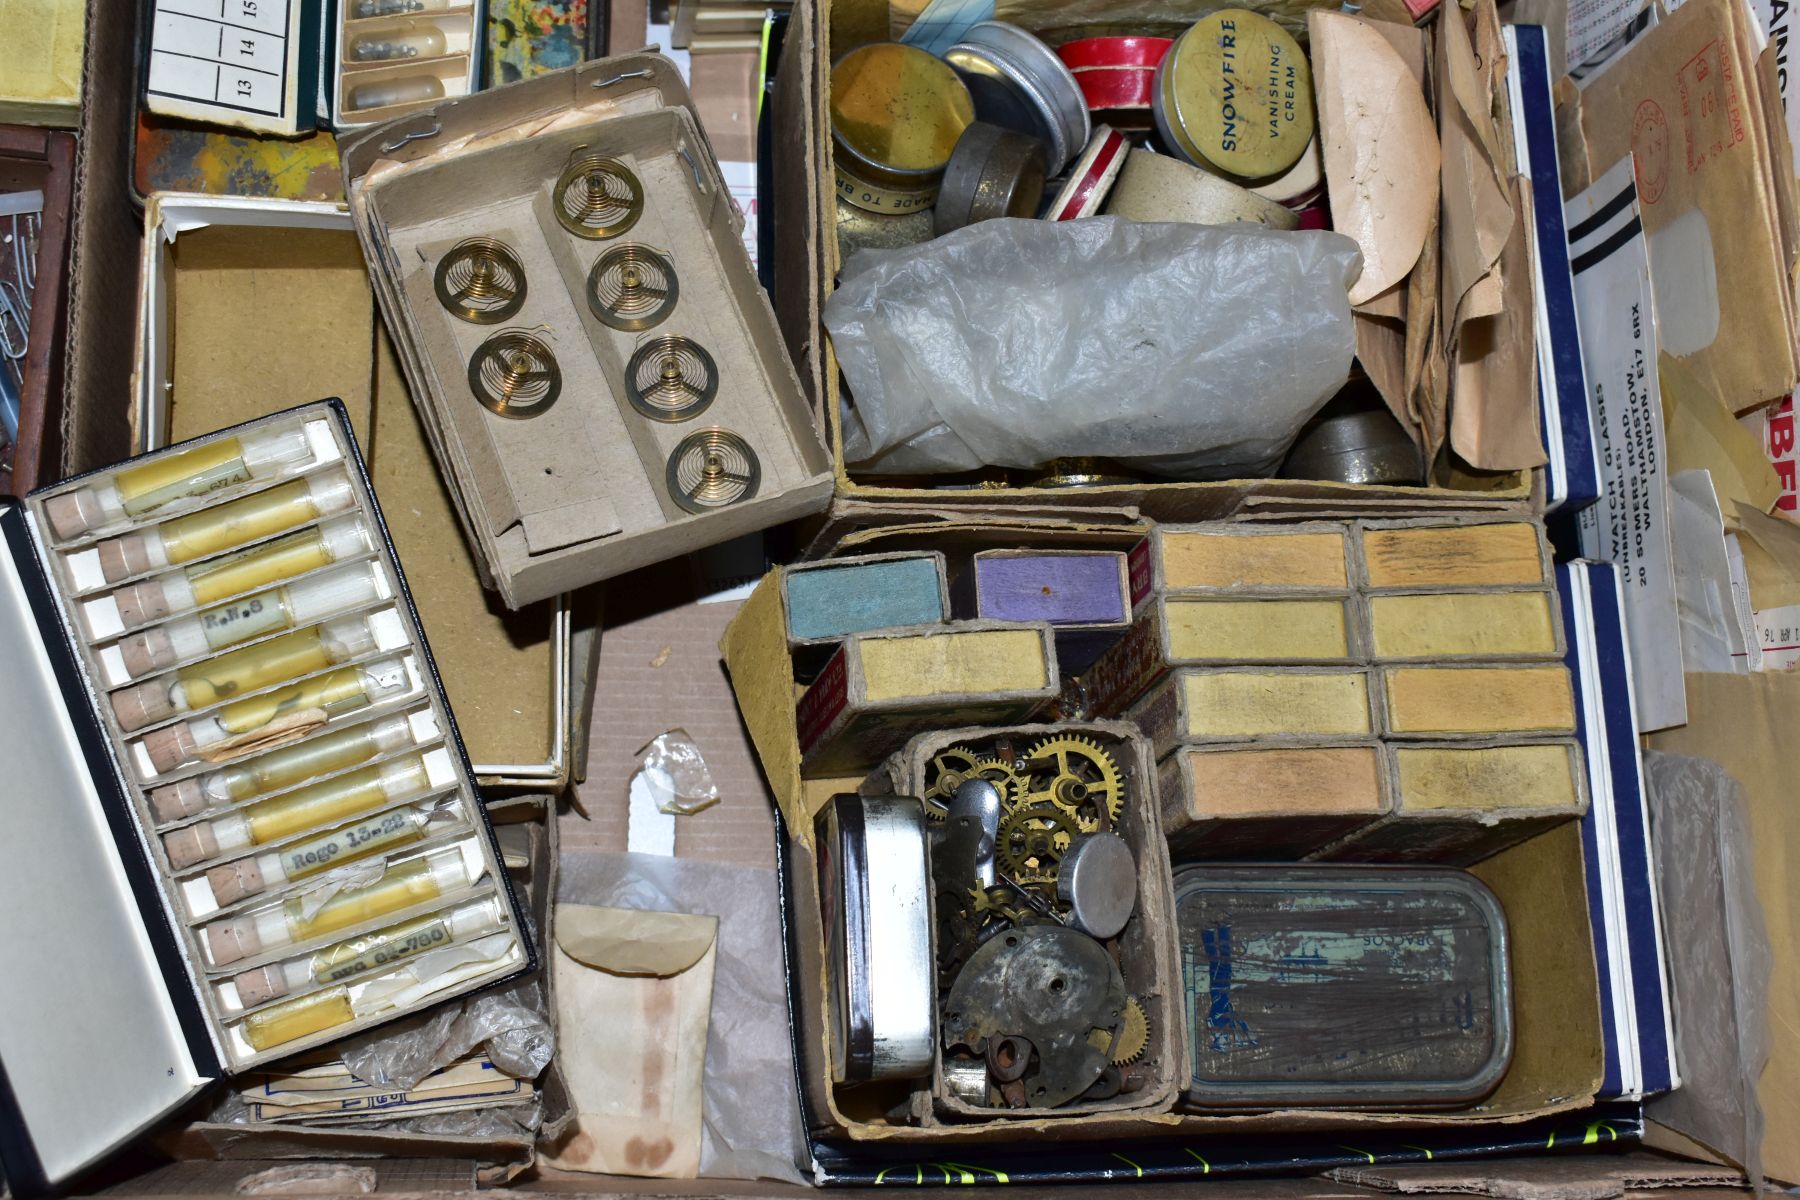 TWO BOXES OF ASSORTED WATCH MAKERS PARTS, GLASSES, COGS, SPRINGS, CROWNS, DECONSTTUCTED WATCH - Image 15 of 30